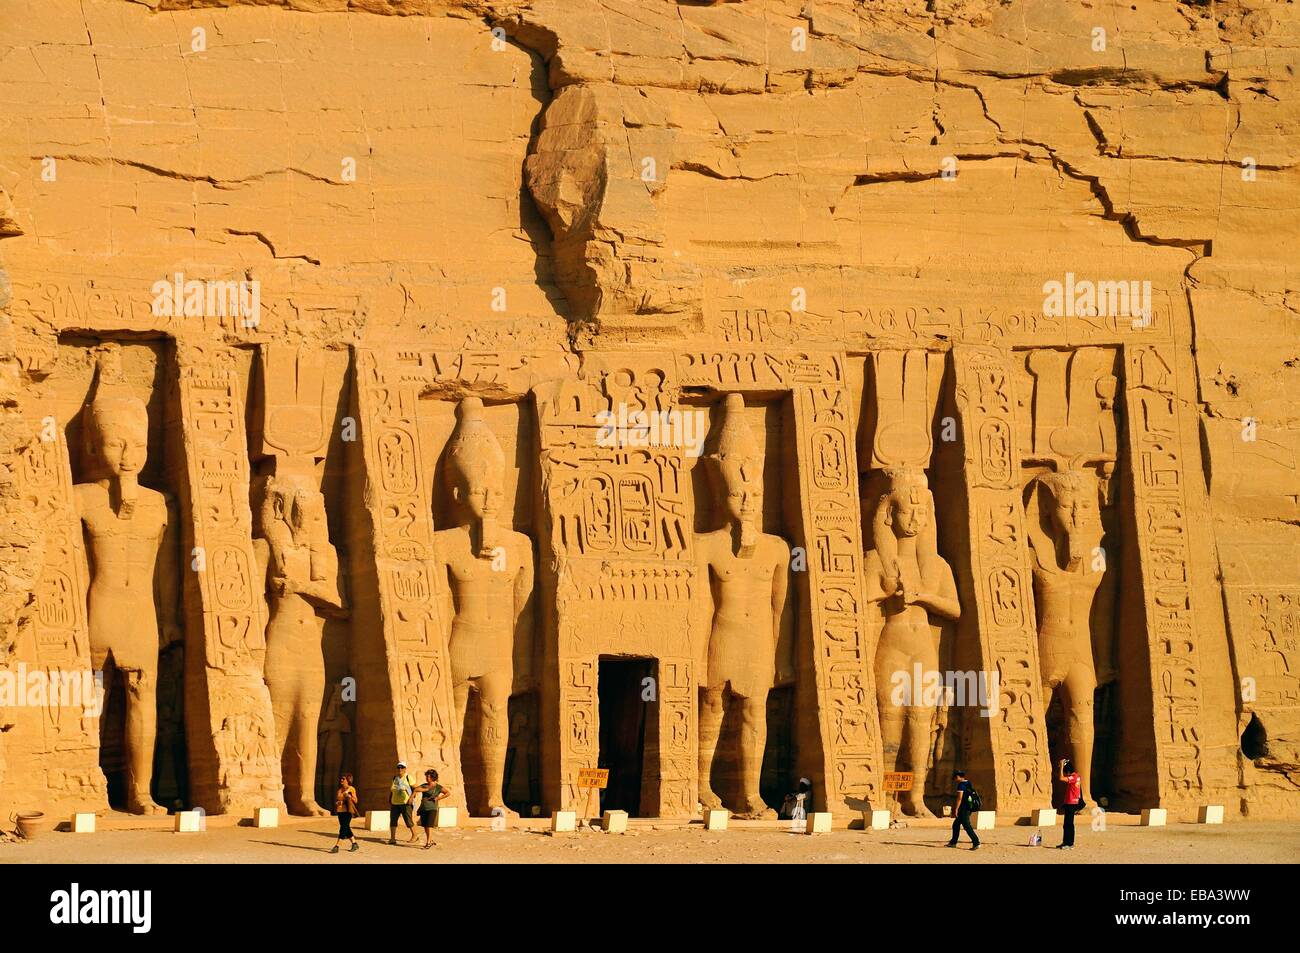 10 100 13th century 13th century BC 1968 230 2nd 300 Abu Simbel Africa after akhenaten alleged ancient Ancient history Stock Photo